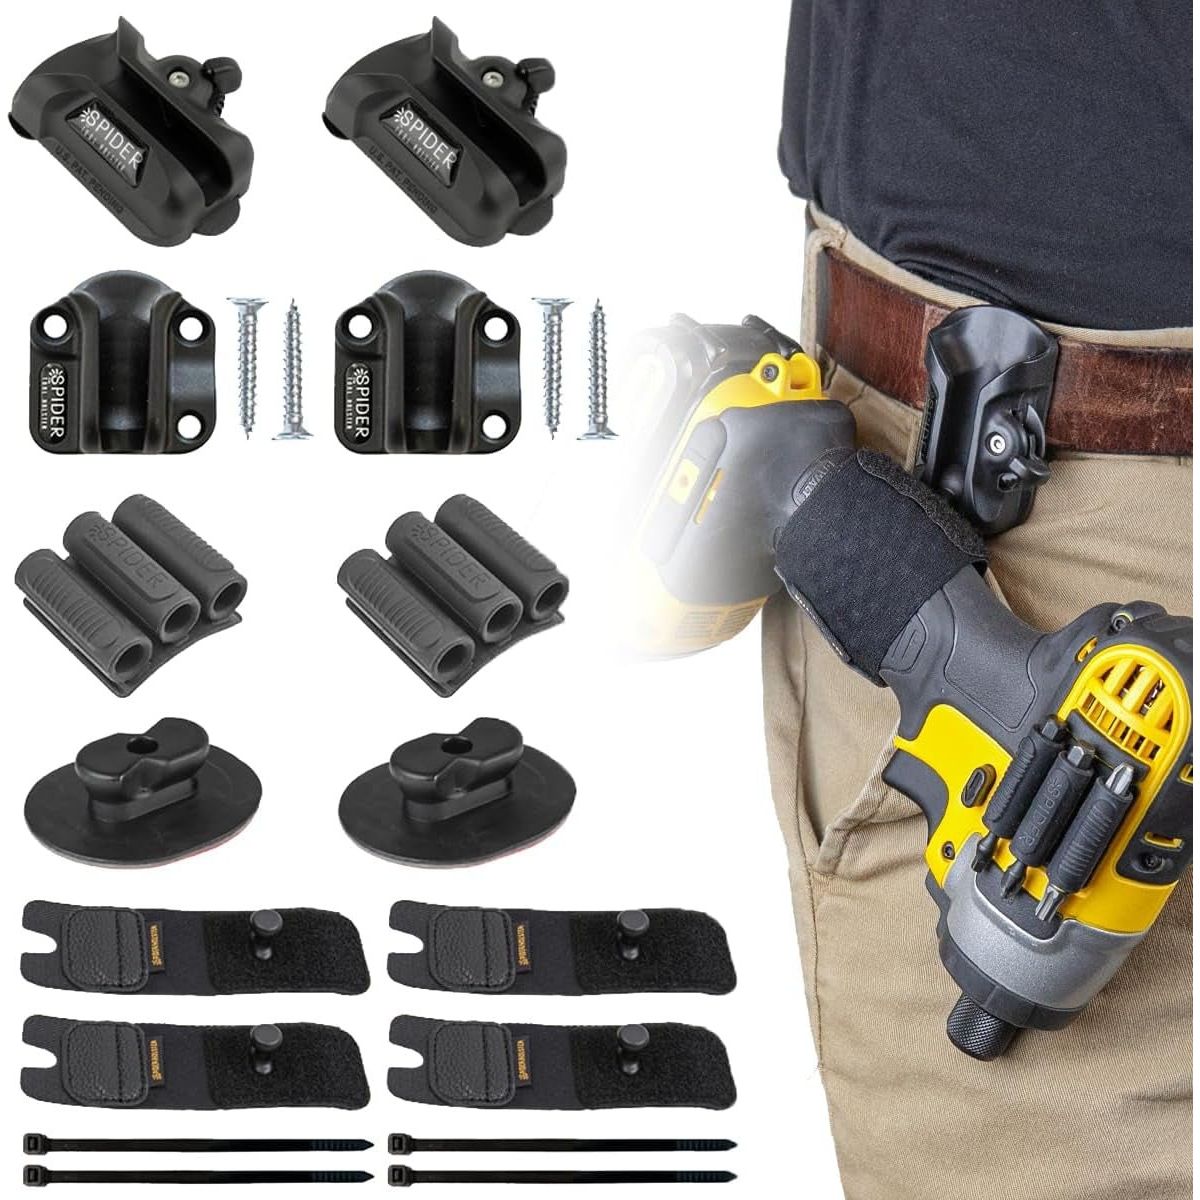 - Improve the Way You Carry Your Power Drill, Driver, Multitool, Pneumatic, Multi-Tool and More on Your Belt Moorescarts